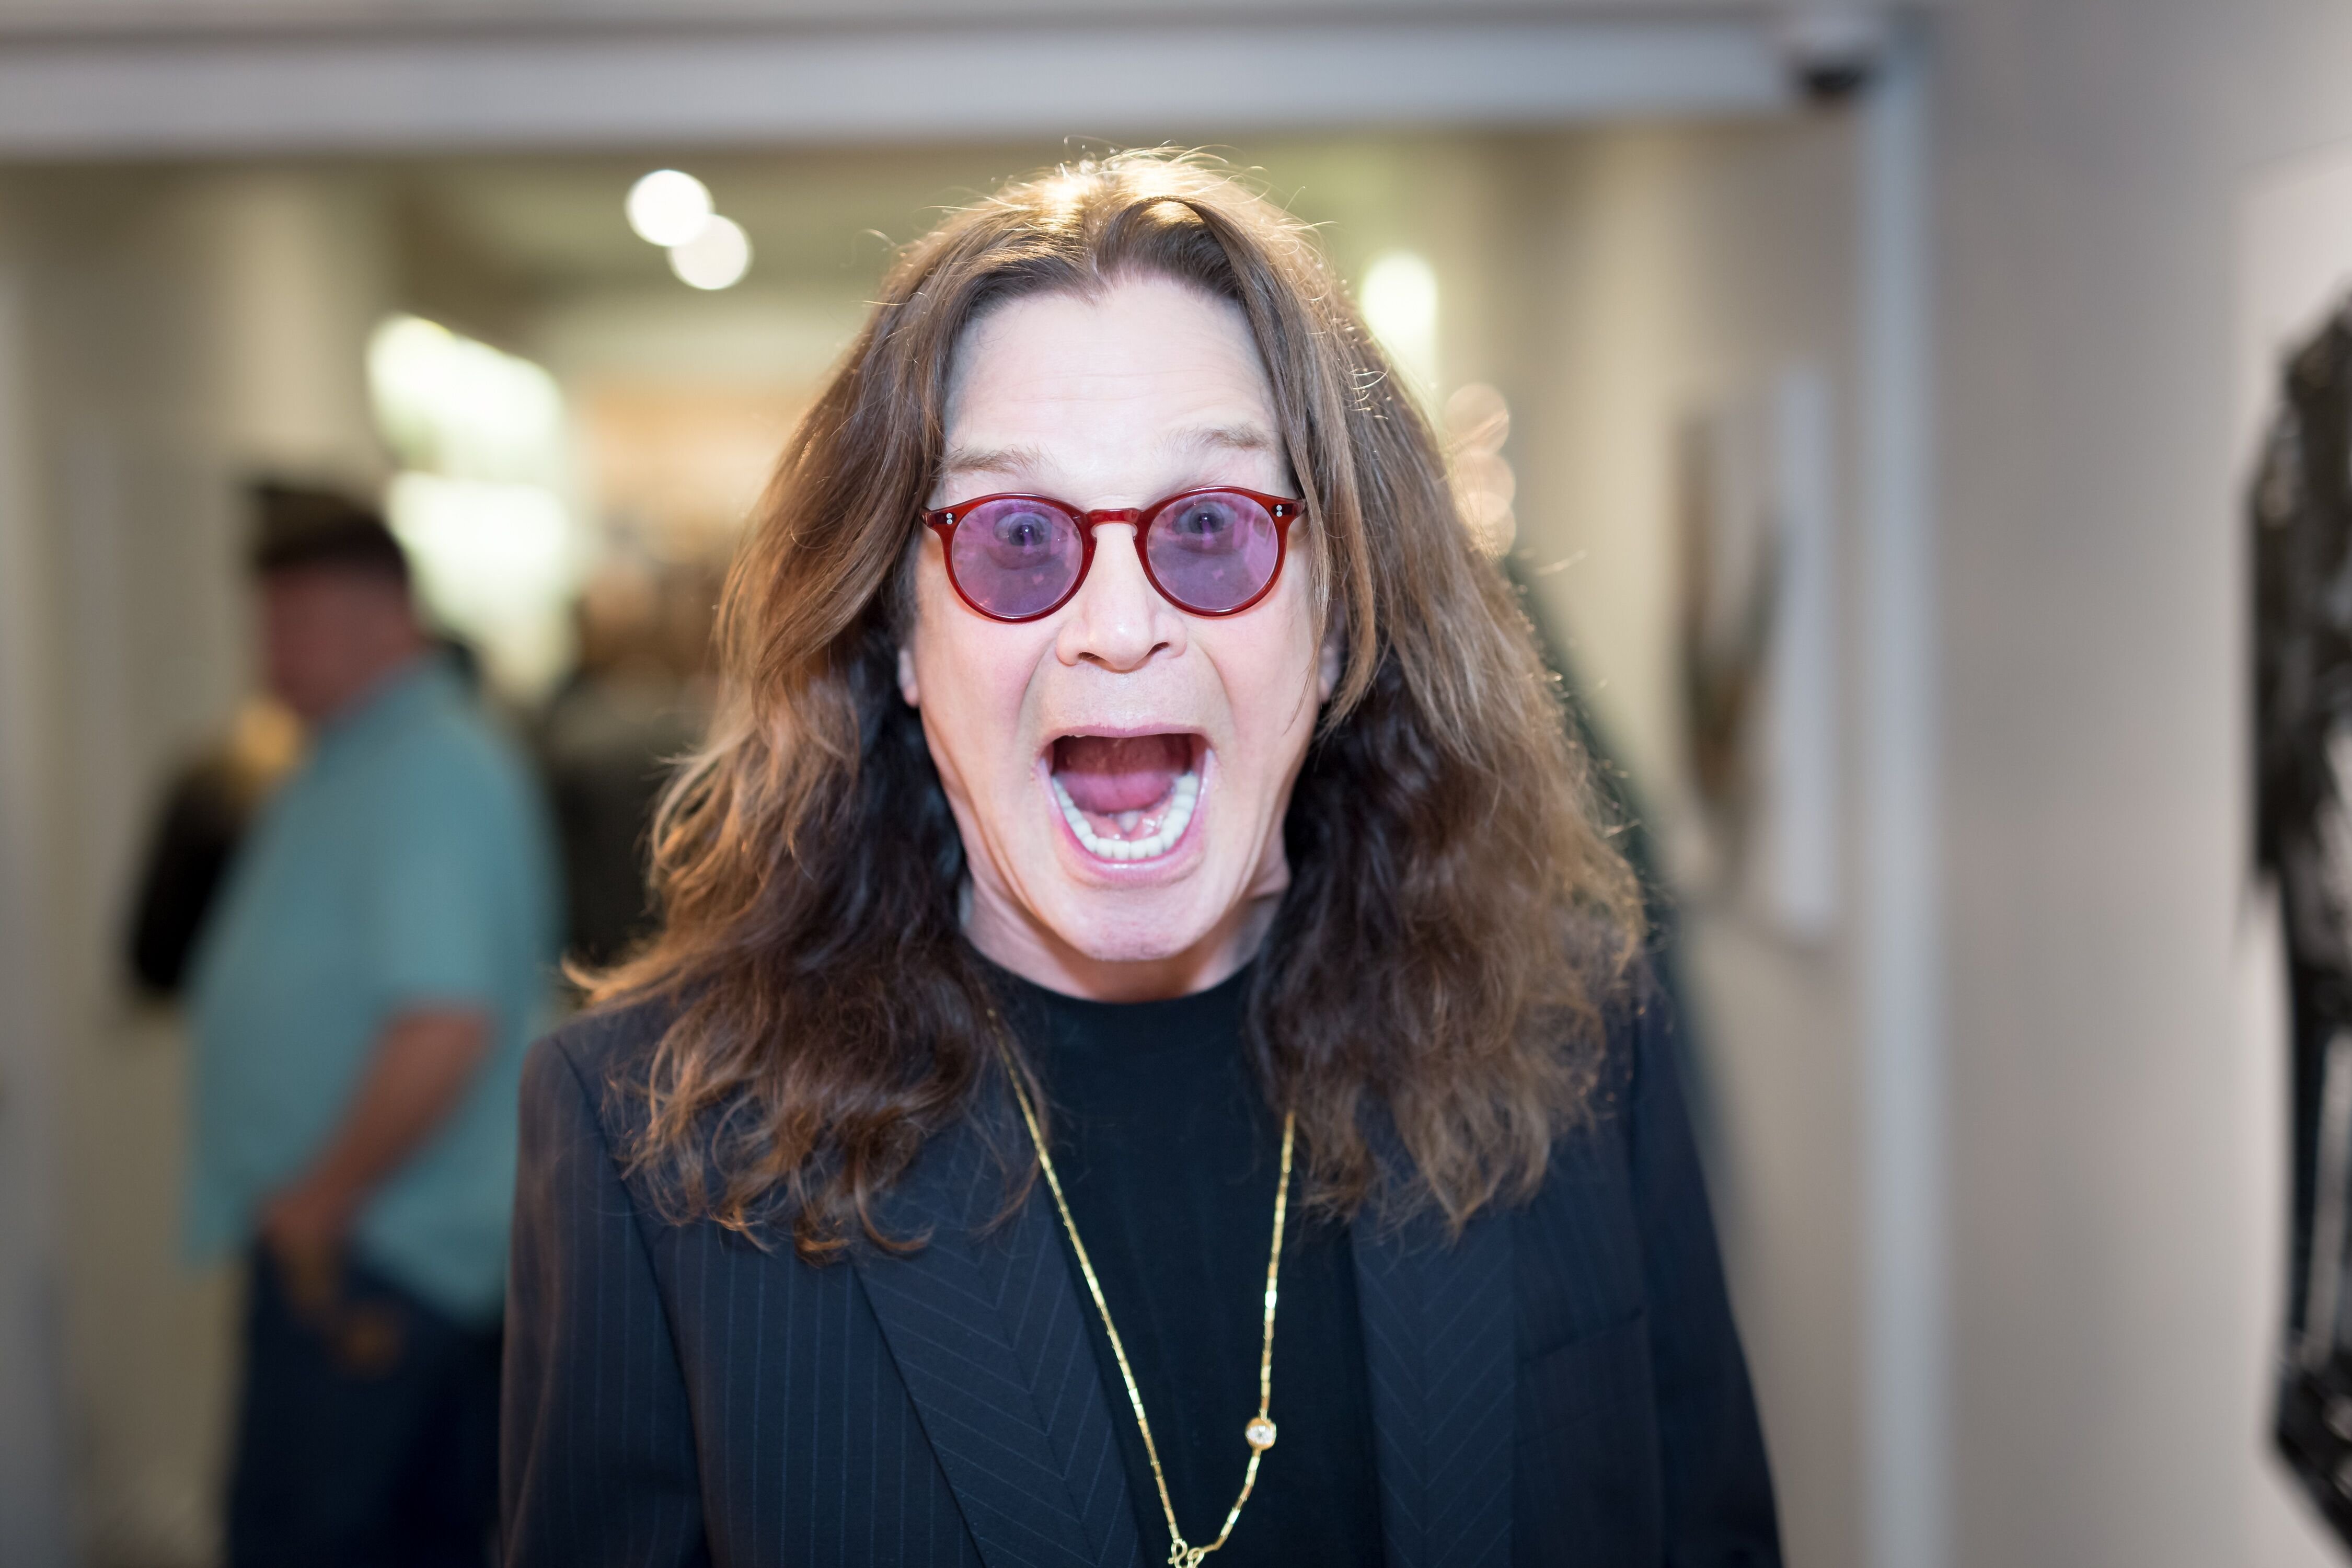 Ozzy Osbourne attends the Billy Morrison - Aude Somnia Solo Exhibition. | Source: Getty Images